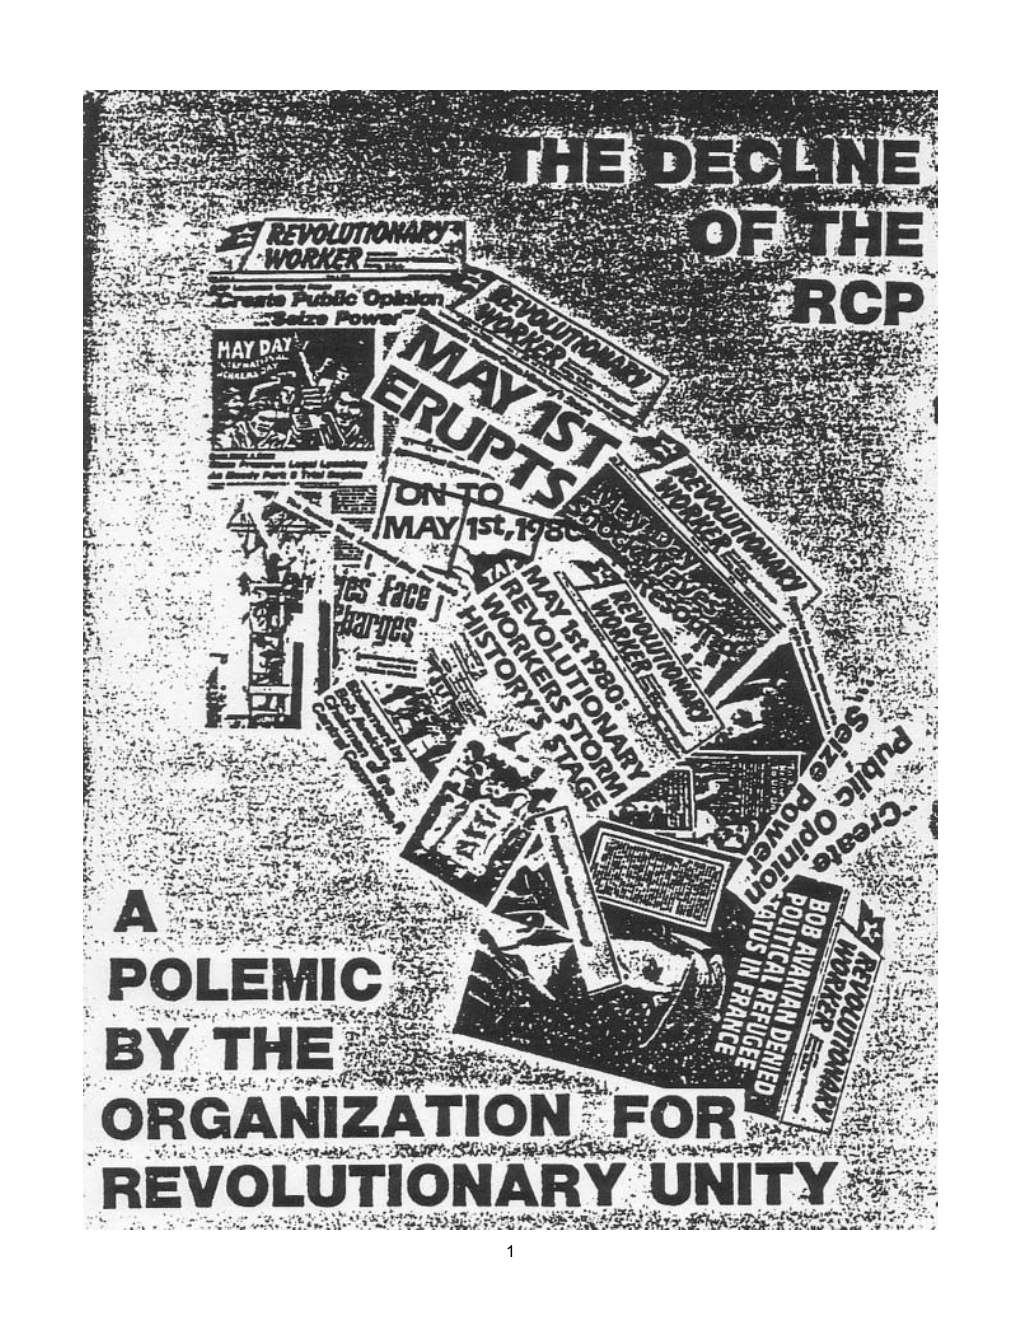 The Decline of the Rcp a Polemic by the Organization for Revolutionary Unity